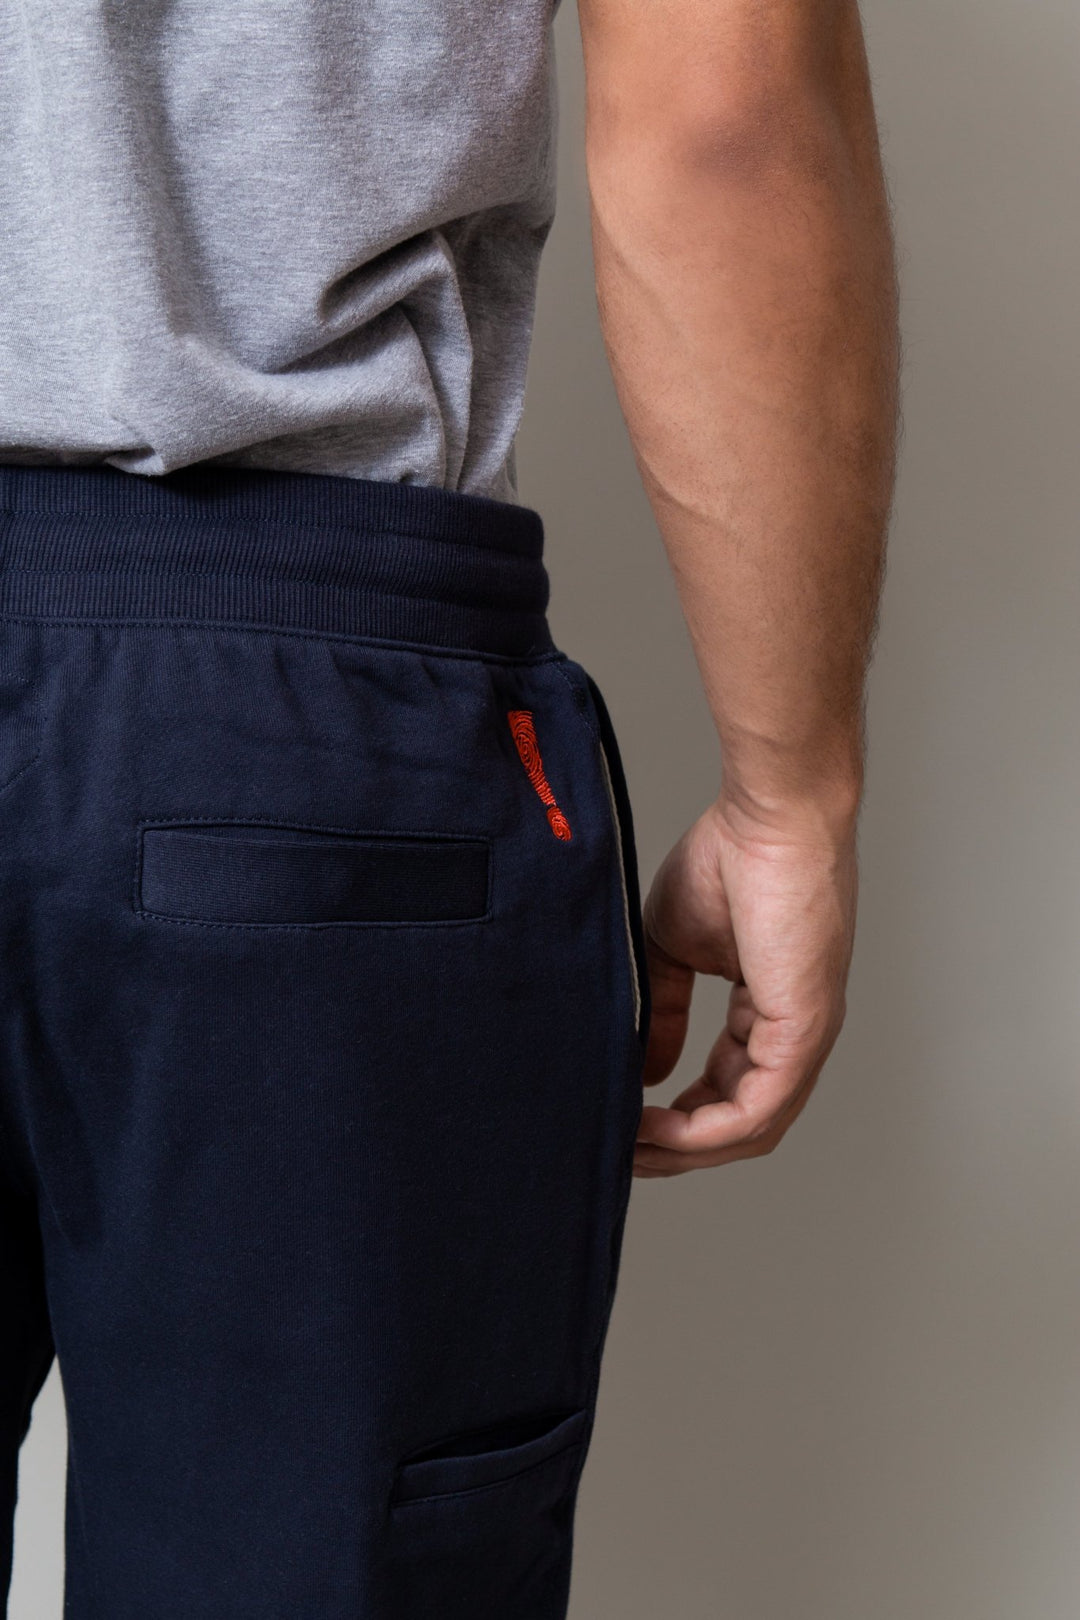 727 Excel 6 Pocket Unisex Pant - Incredibly Comfortable Uniforms